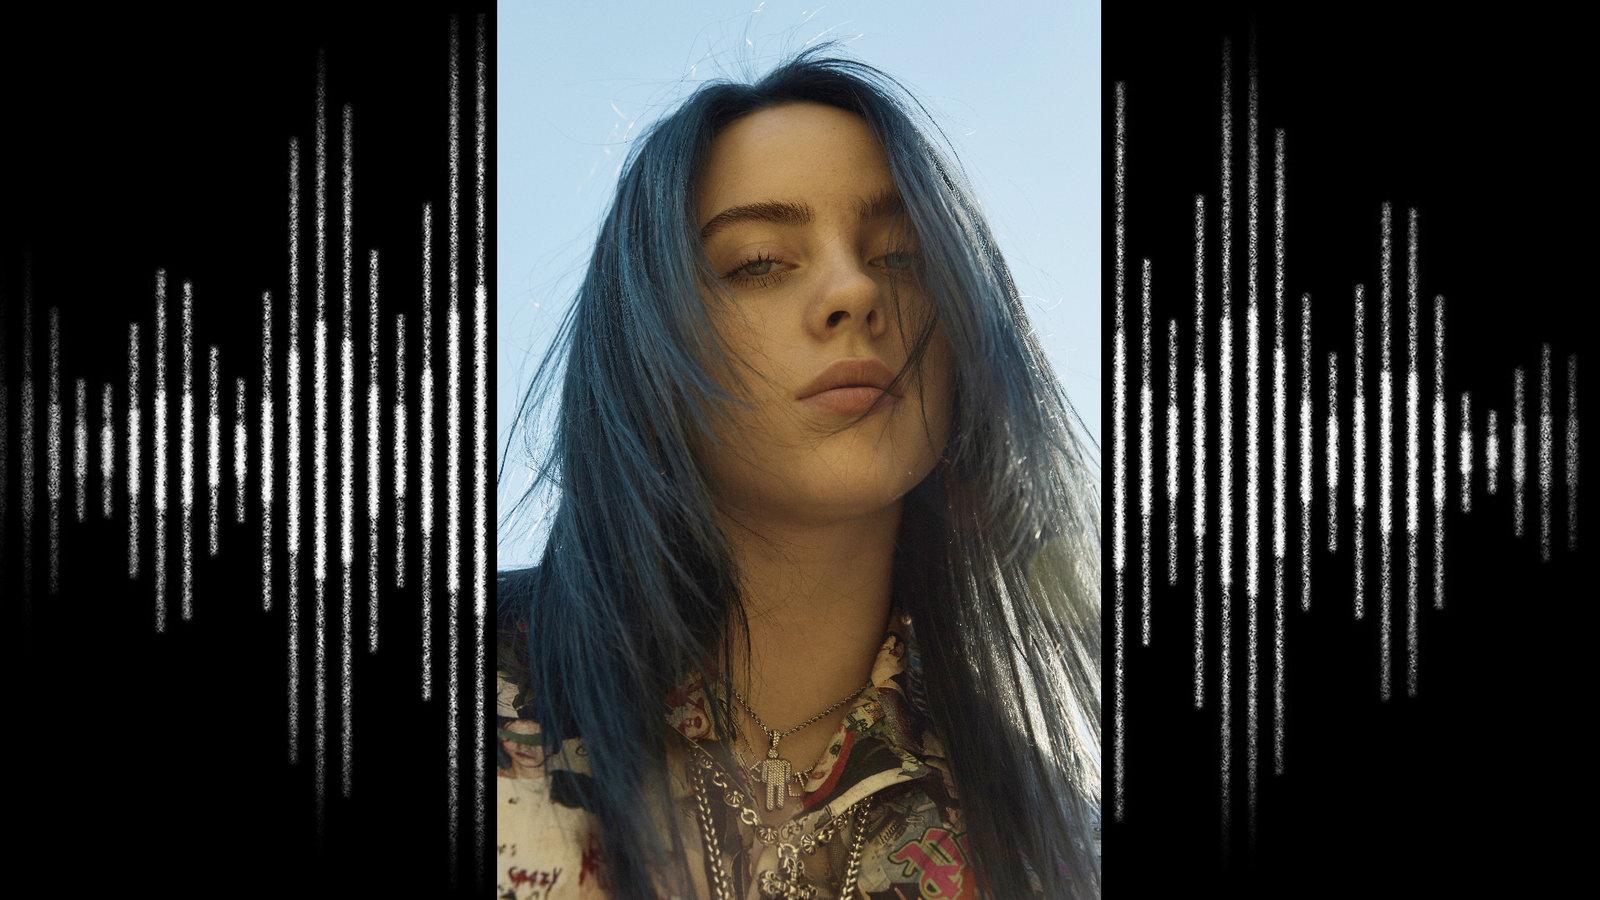 Billie Eilish Is Not Your Typical 17 Year Old Pop Star. Get Used To